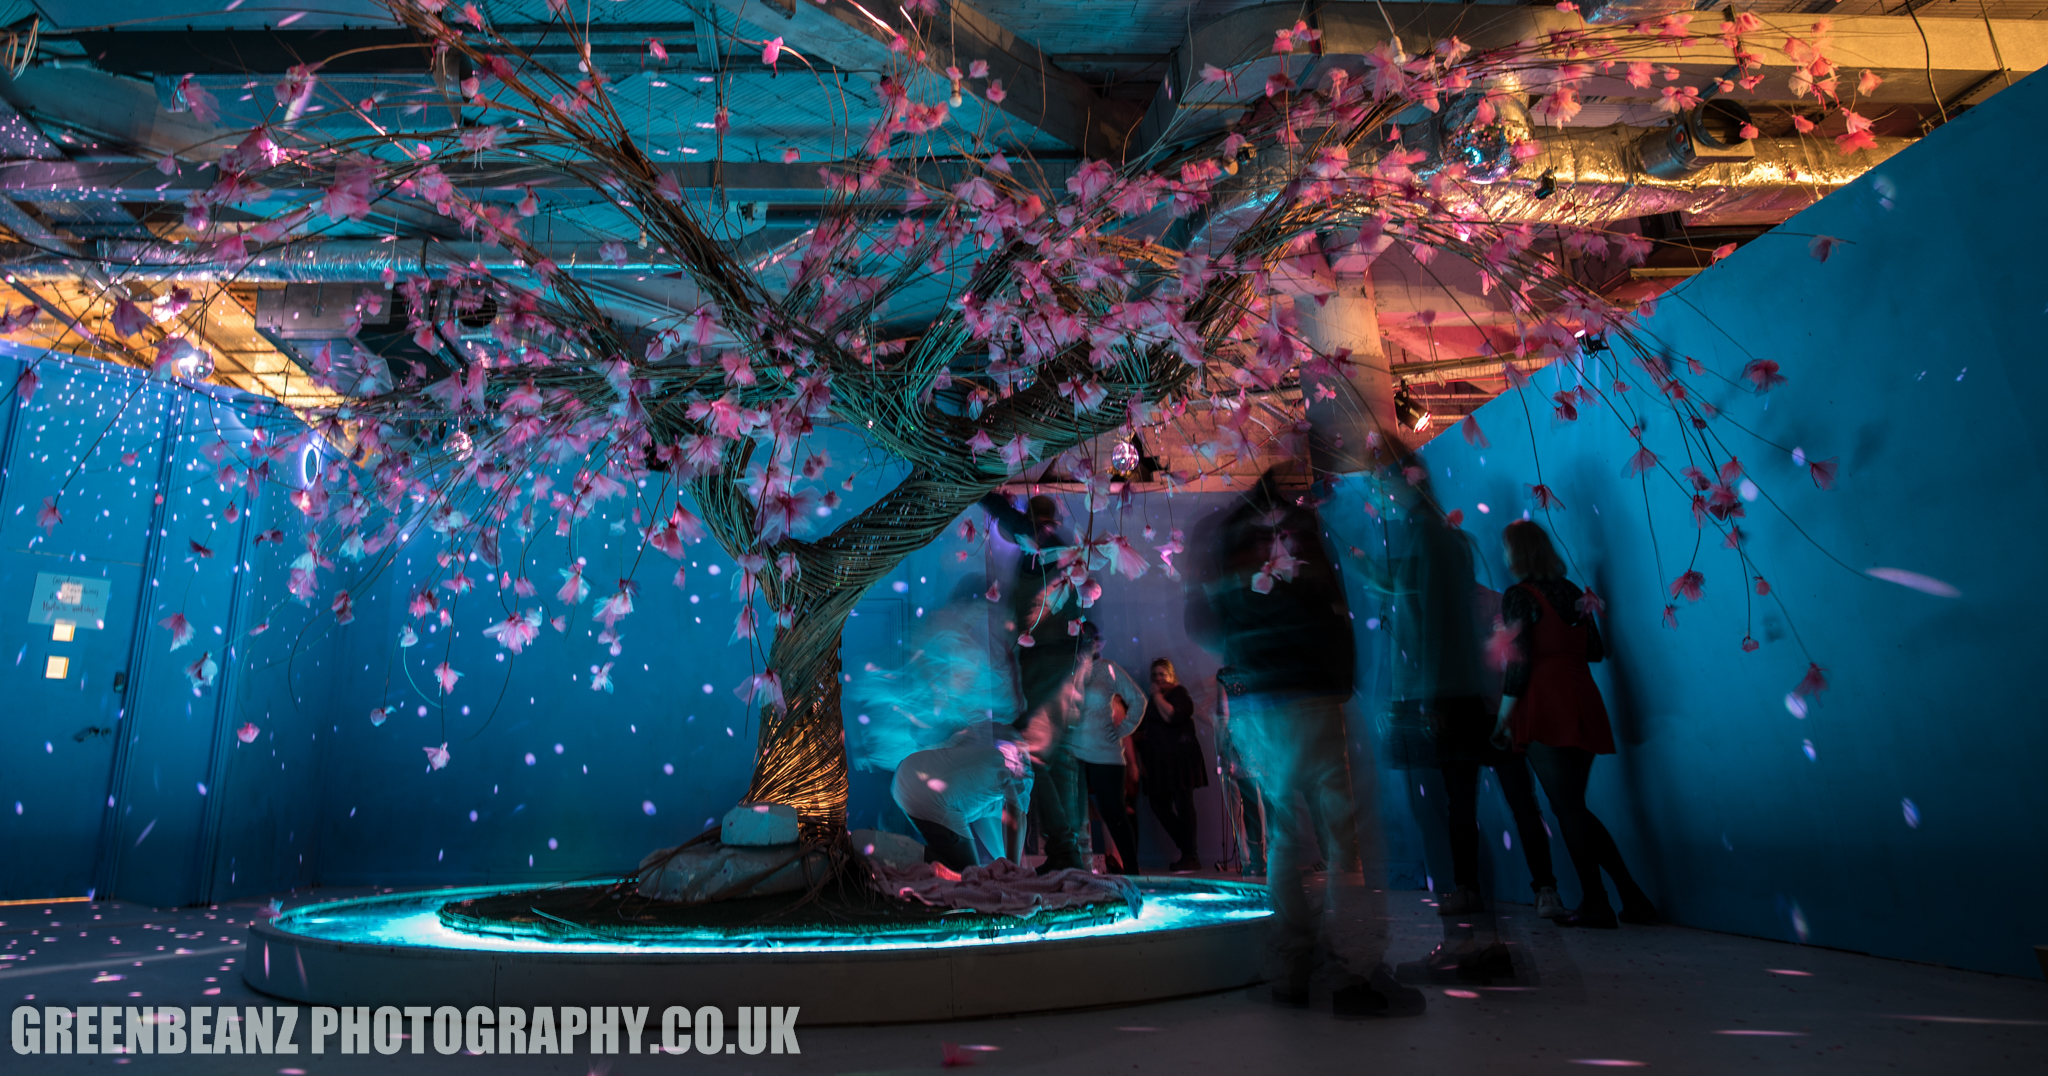 The 'Breathe' installation by Effervescent at the Radiant Gallery in Plymouth